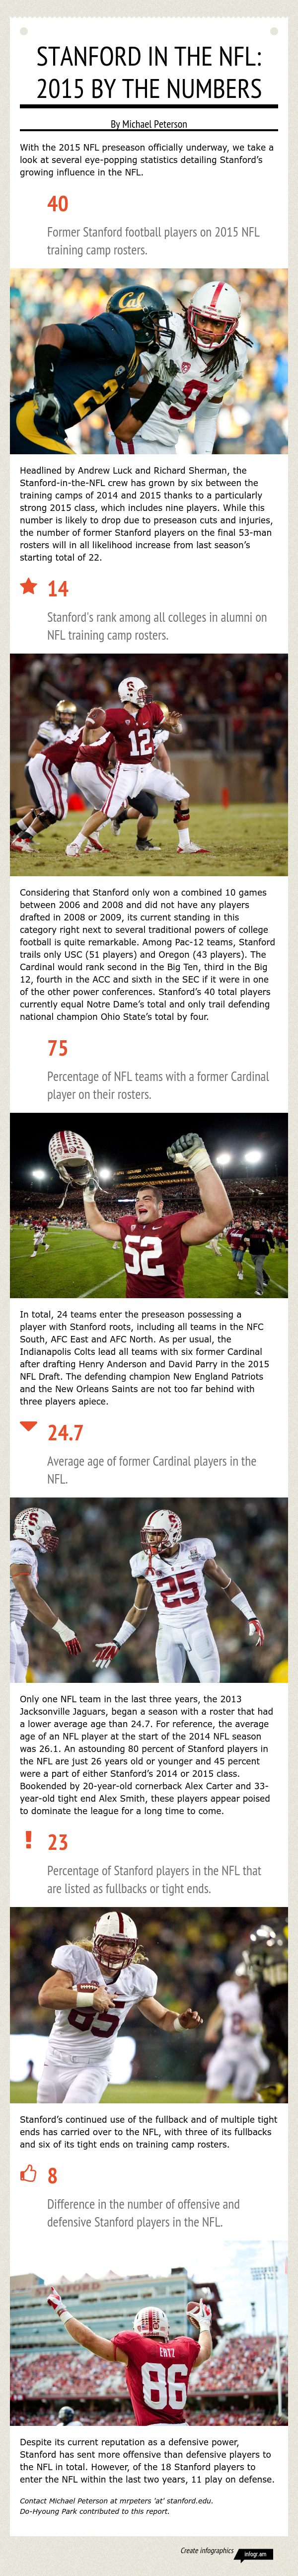 Stanford_in_the_NFL (2)